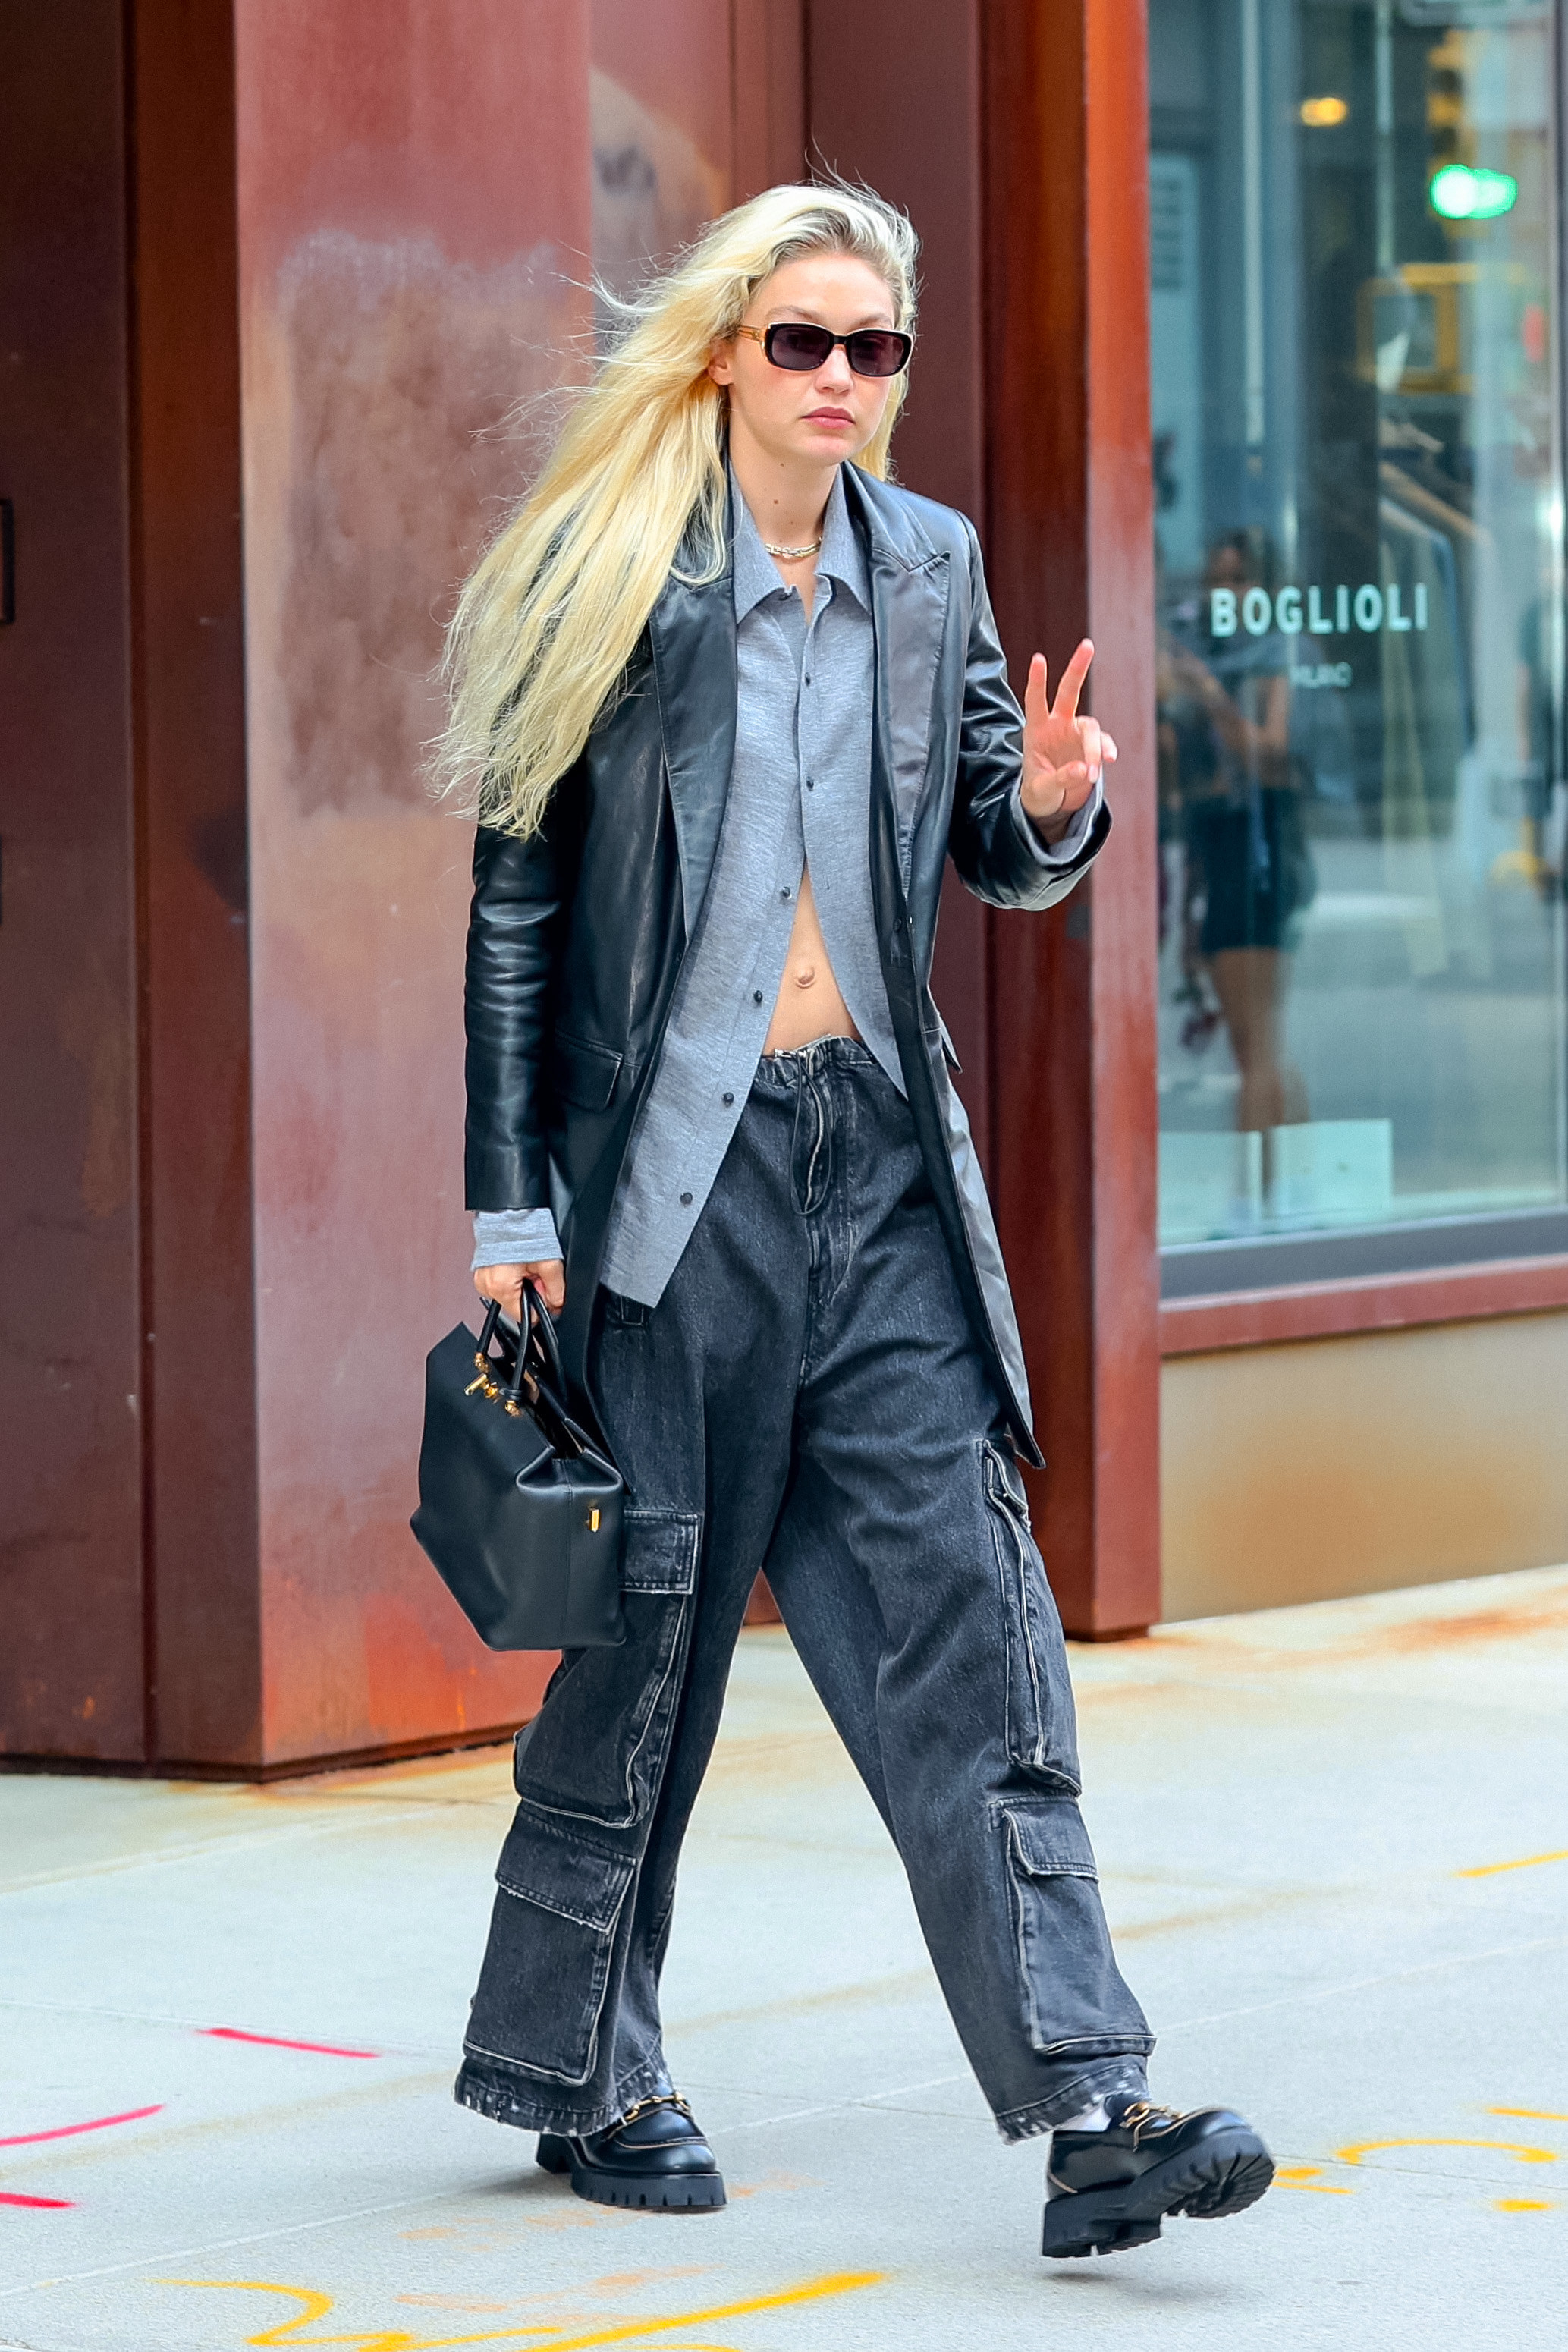 Gigi in loose cargo jeans and a jacket and giving the peace sign